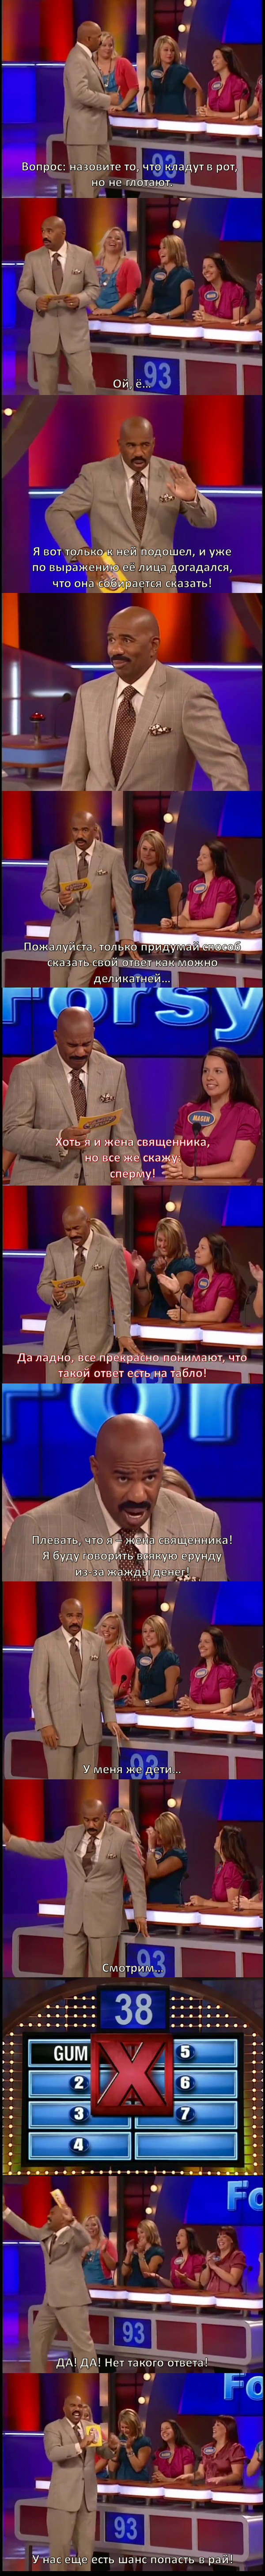 What is not swallowed? | Family Feud/Hundred to One - Humor, Longpost, One hundred to one, Family Feud, NSFW